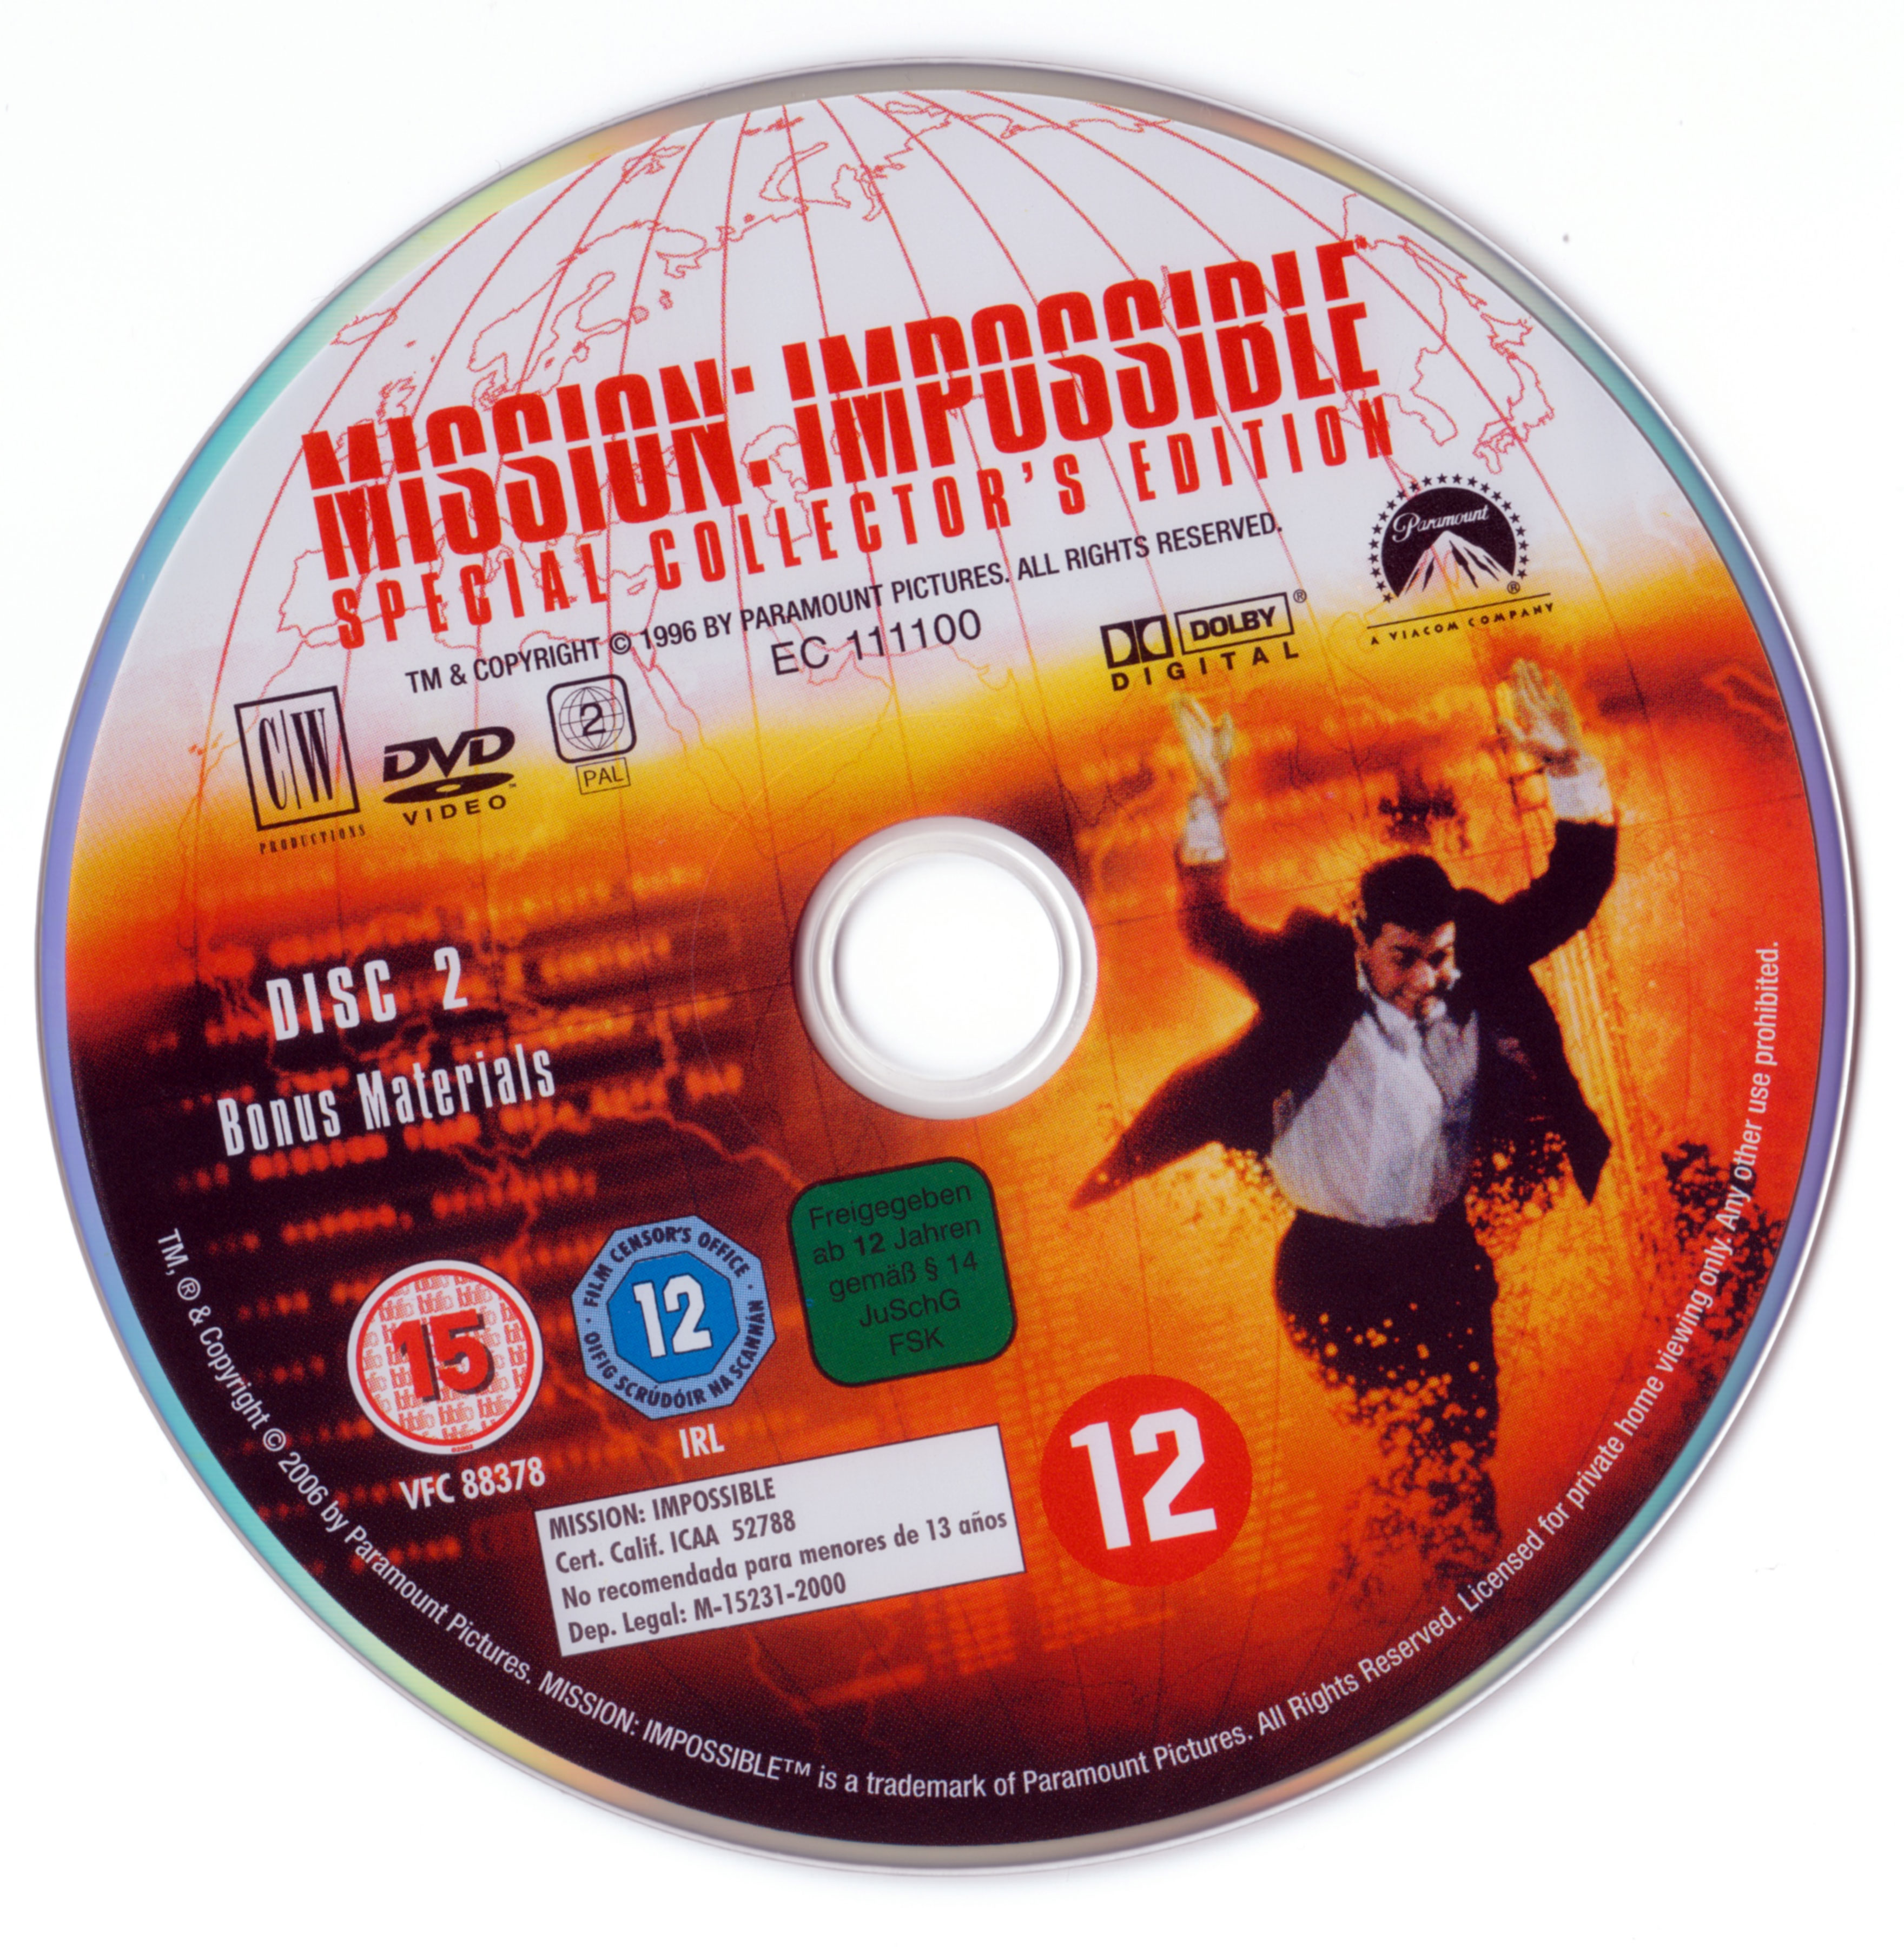 Mission impossible DISC 2